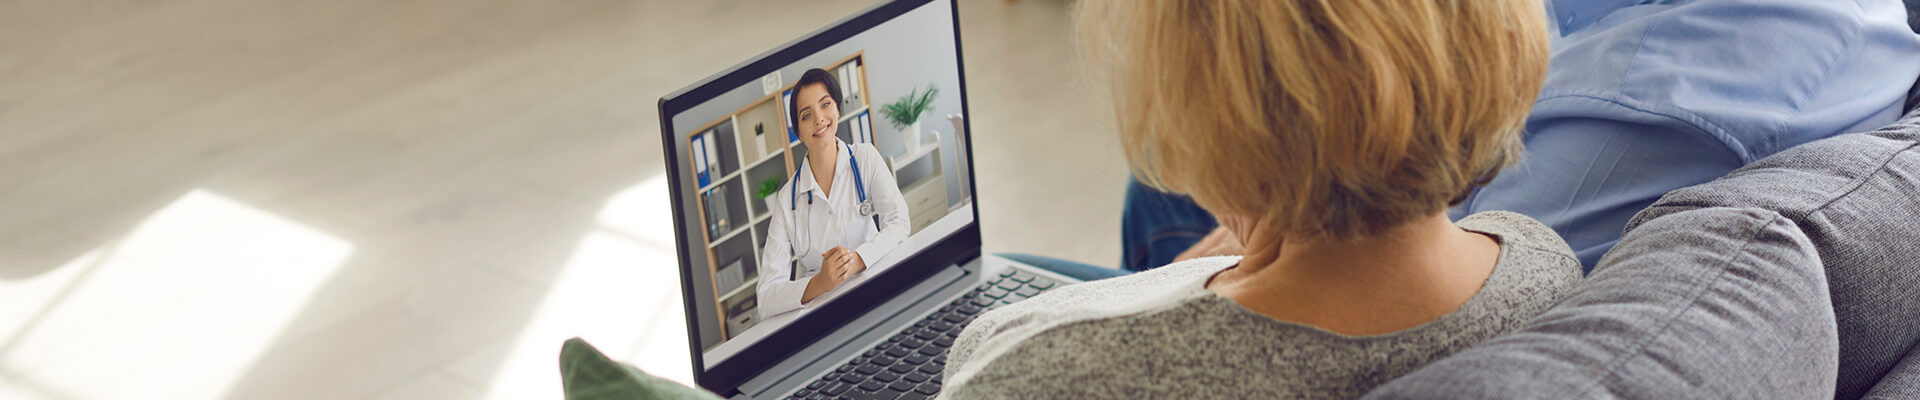 woman in video call with female physician wearing labcoat on laptop screen